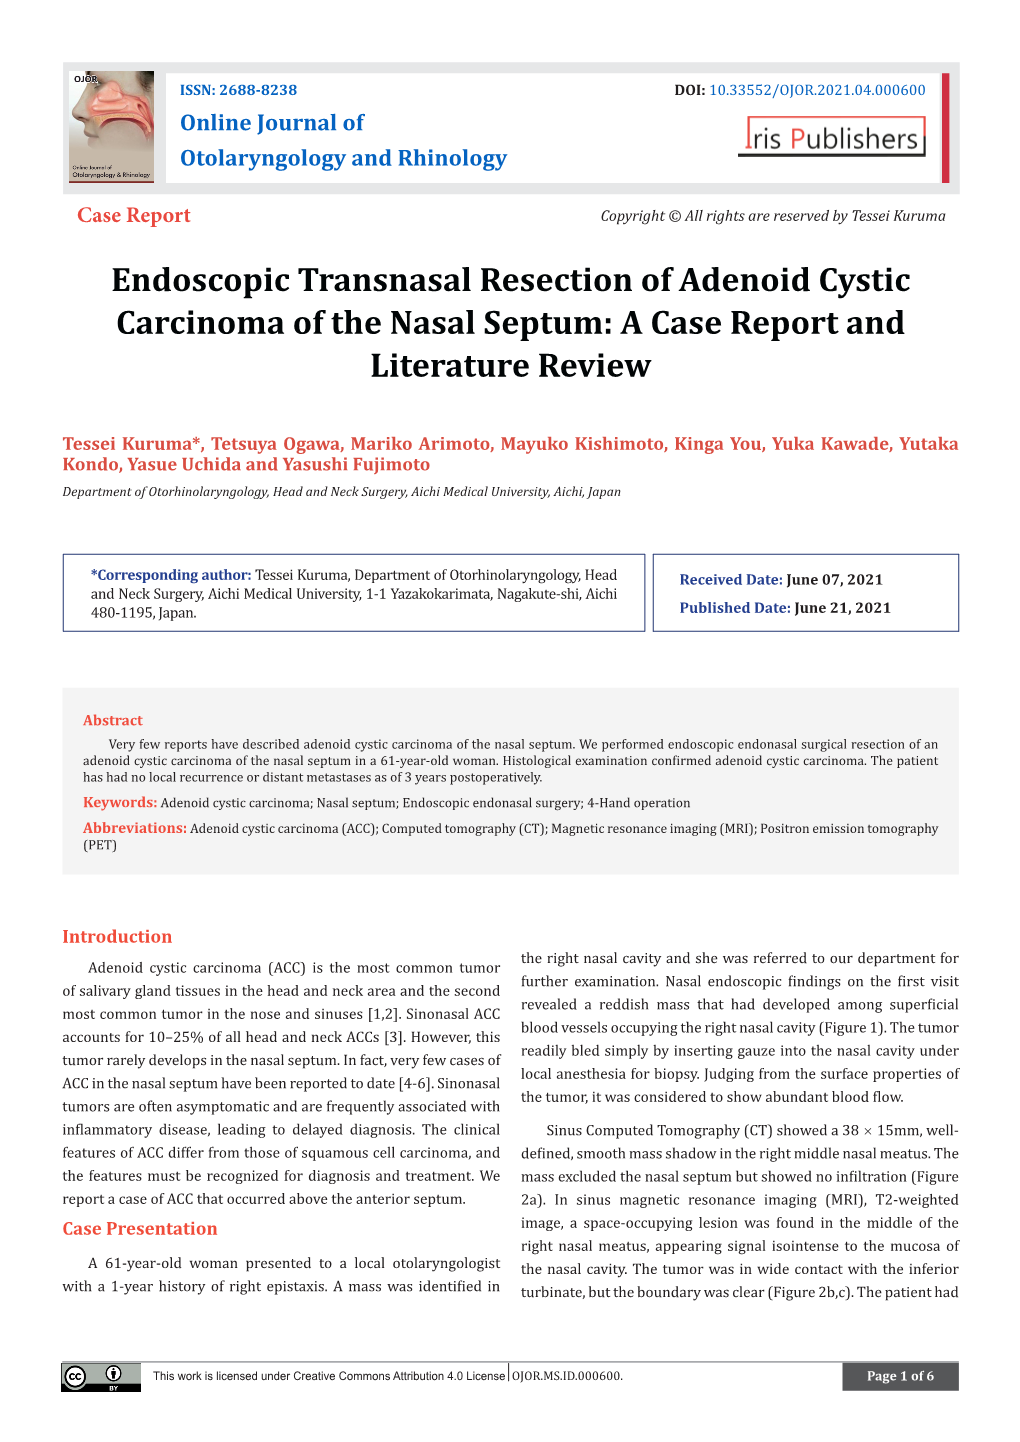 Endoscopic Transnasal Resection of Adenoid Cystic Carcinoma of the Nasal Septum: a Case Report and Literature Review